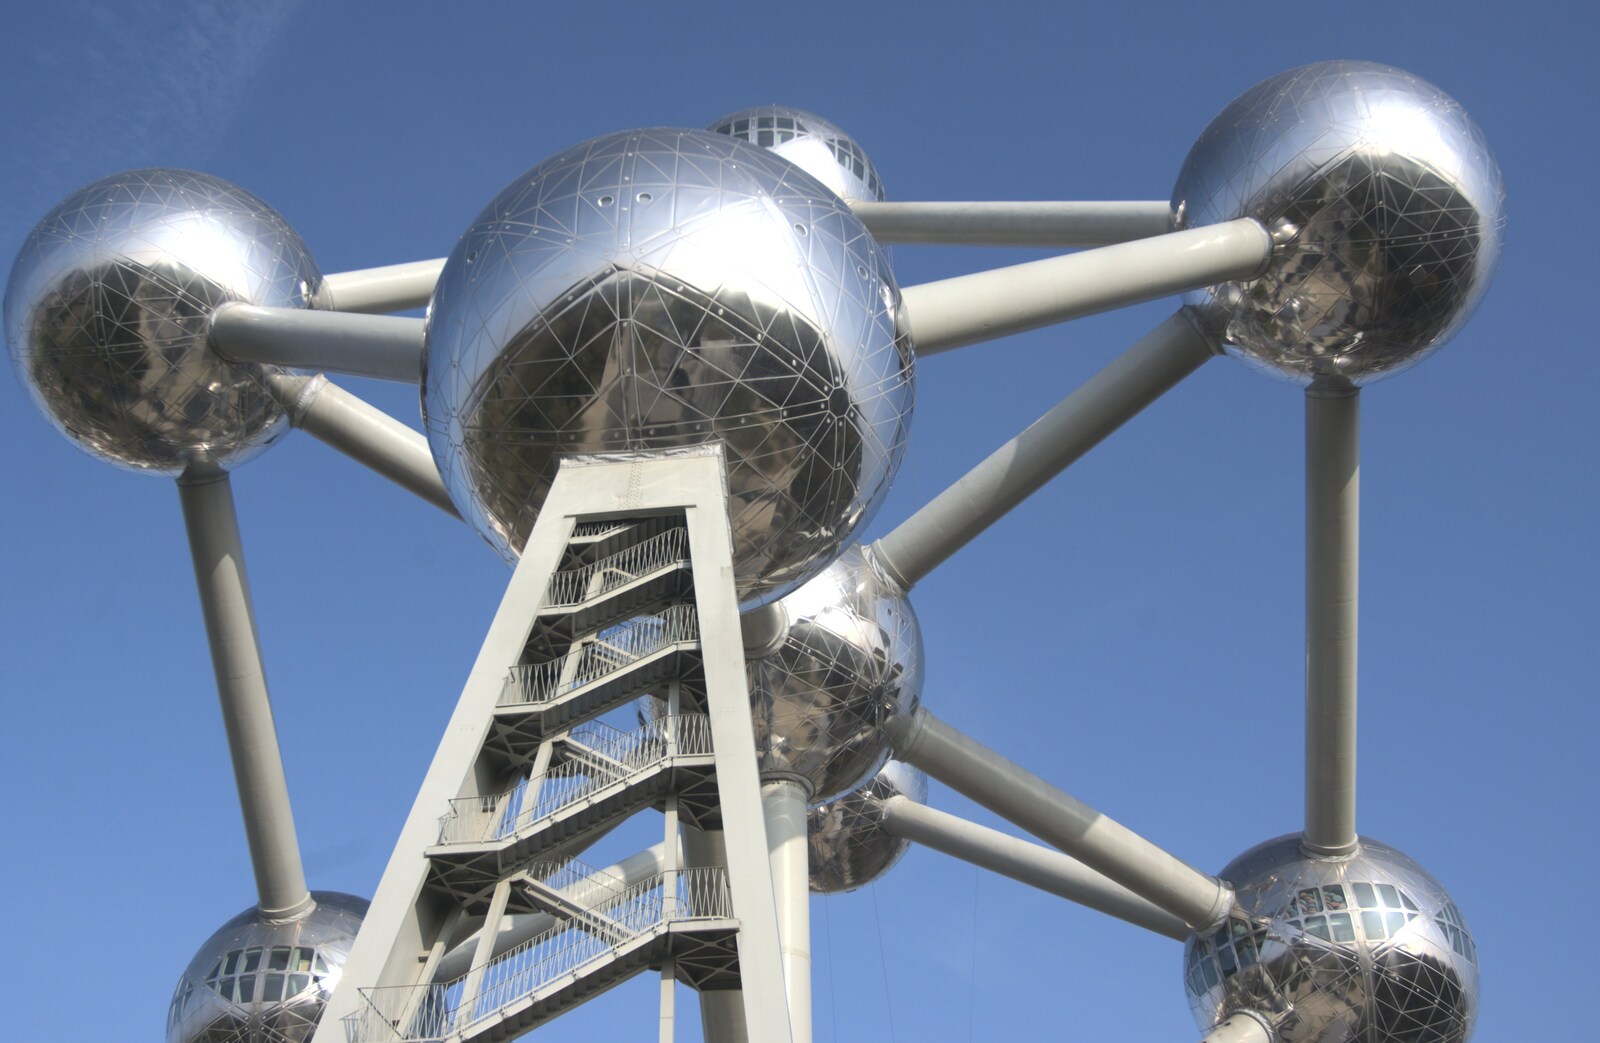 Shiny stainless-steel balls from A Day Trip to Brussels, Belgium - 5th April 2009